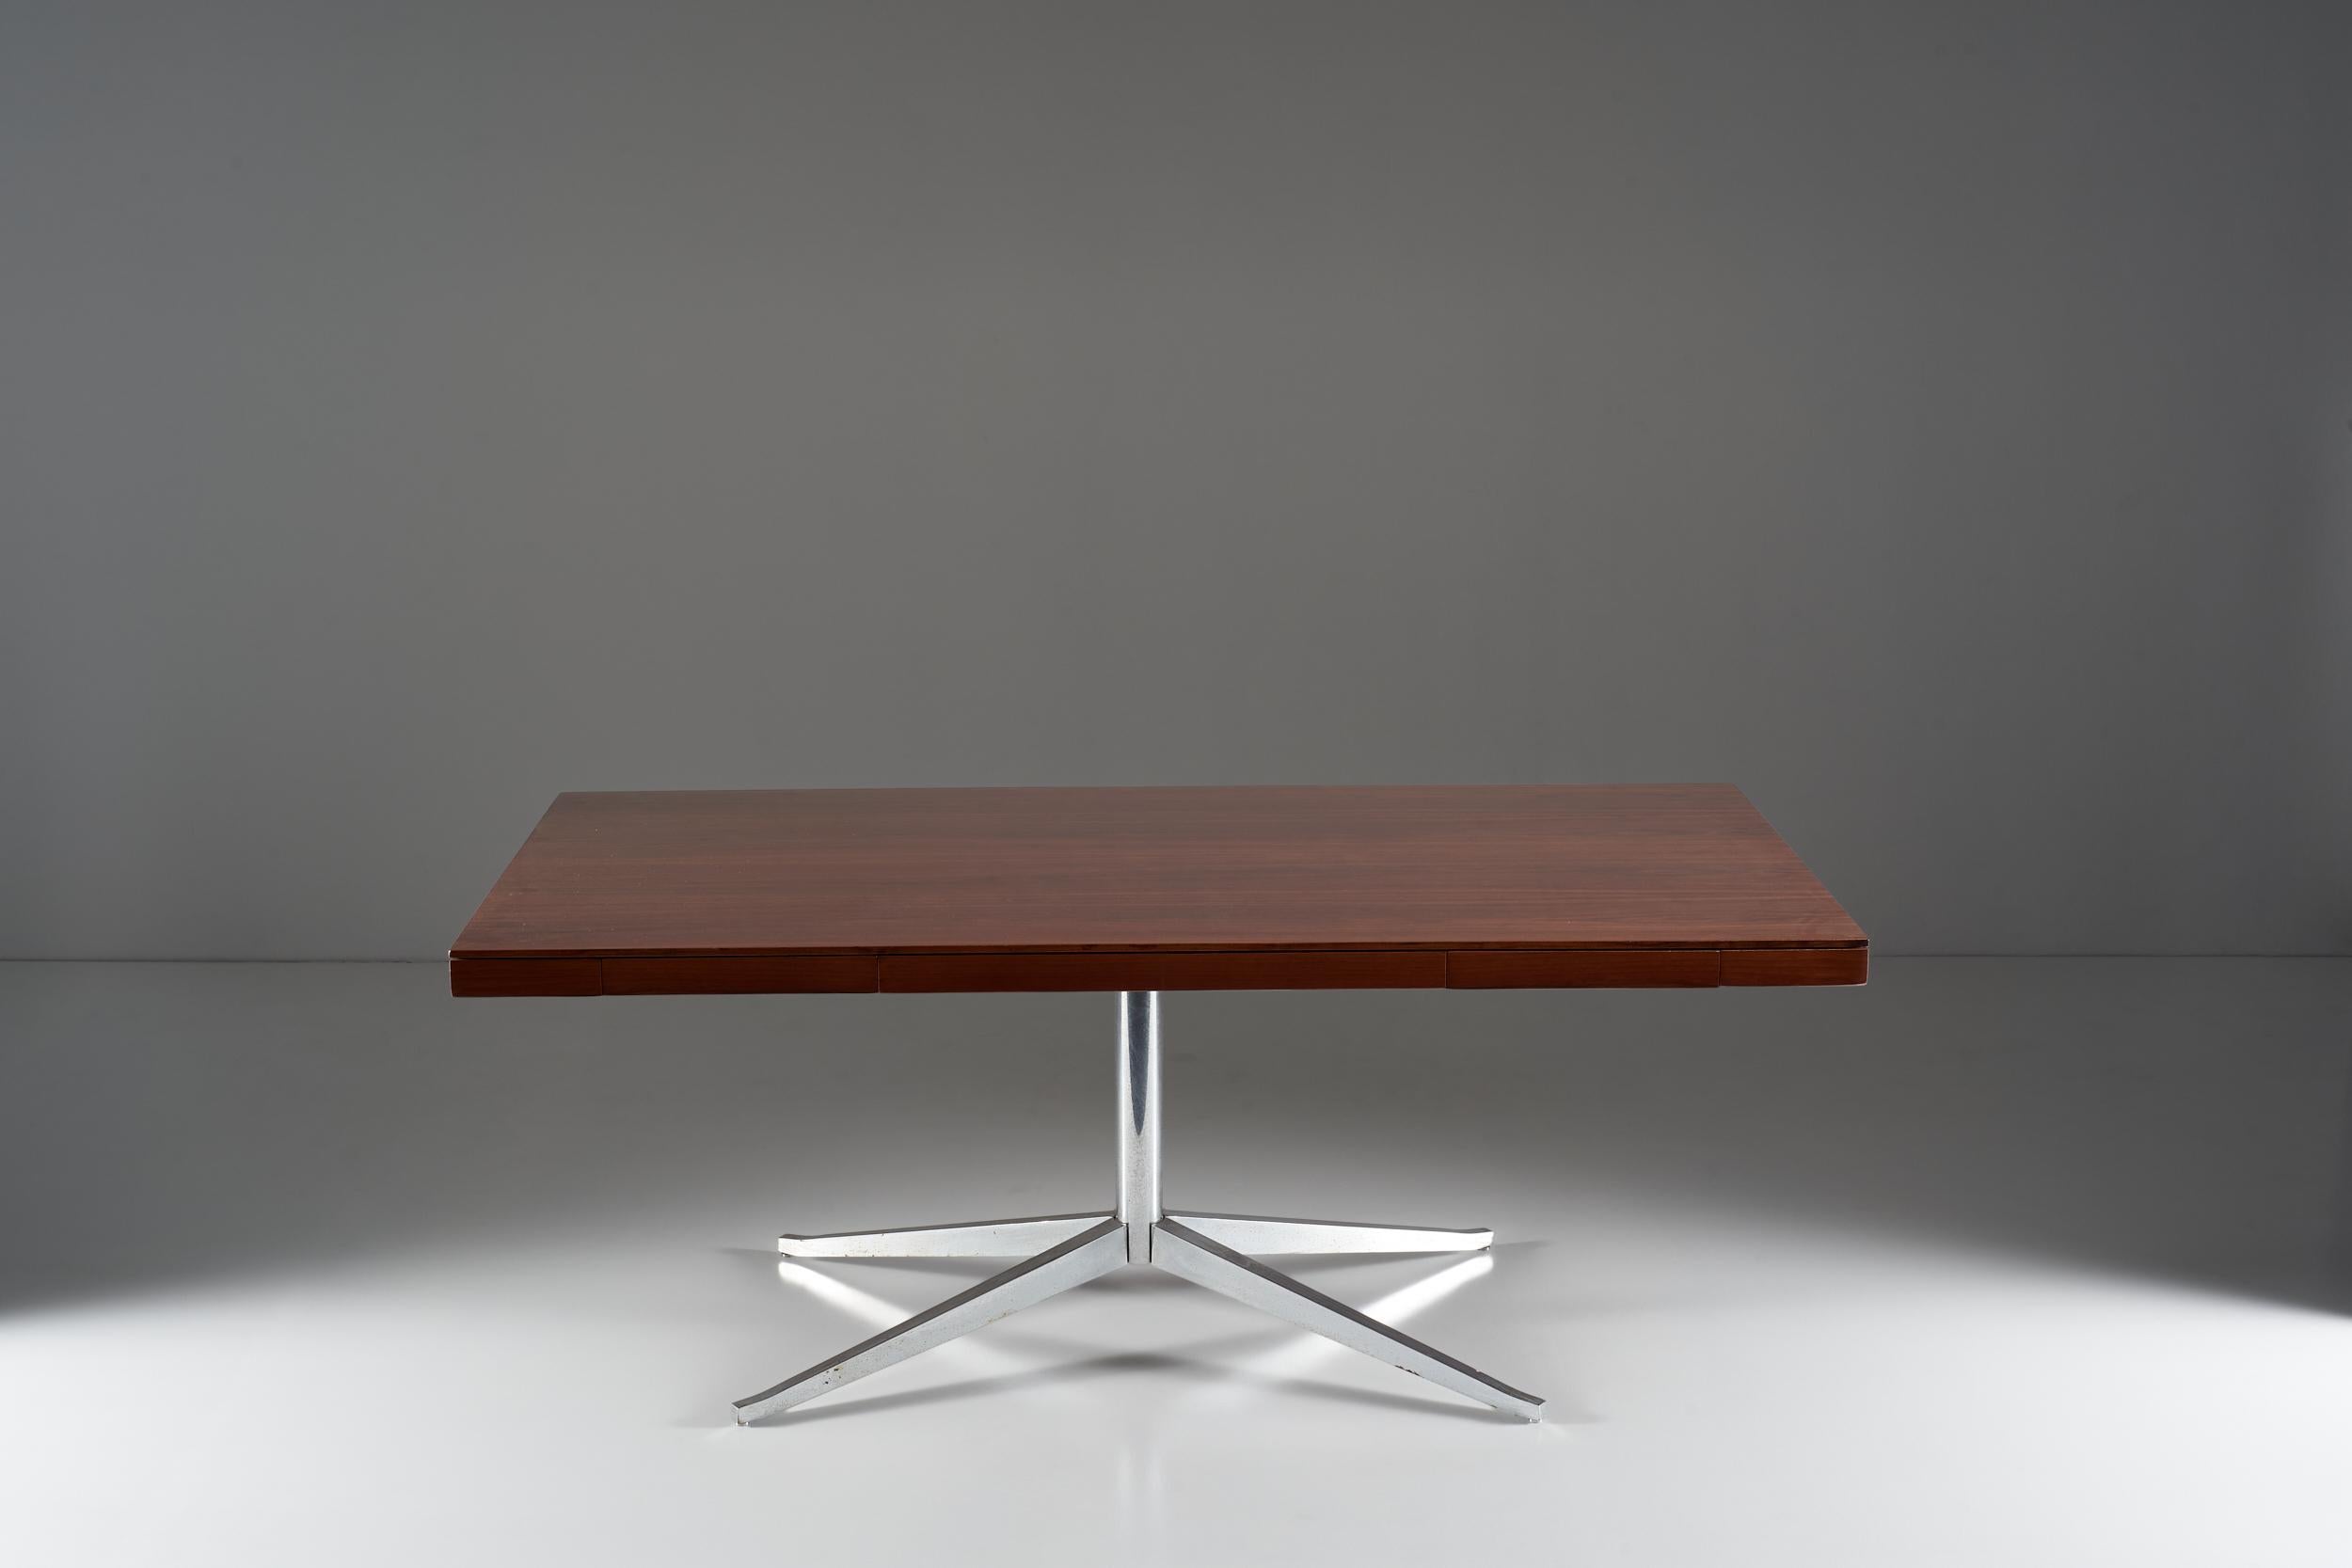 Italian Florence Knoll Table with Chromed Iron Frame and Wooden Top, circa 1951